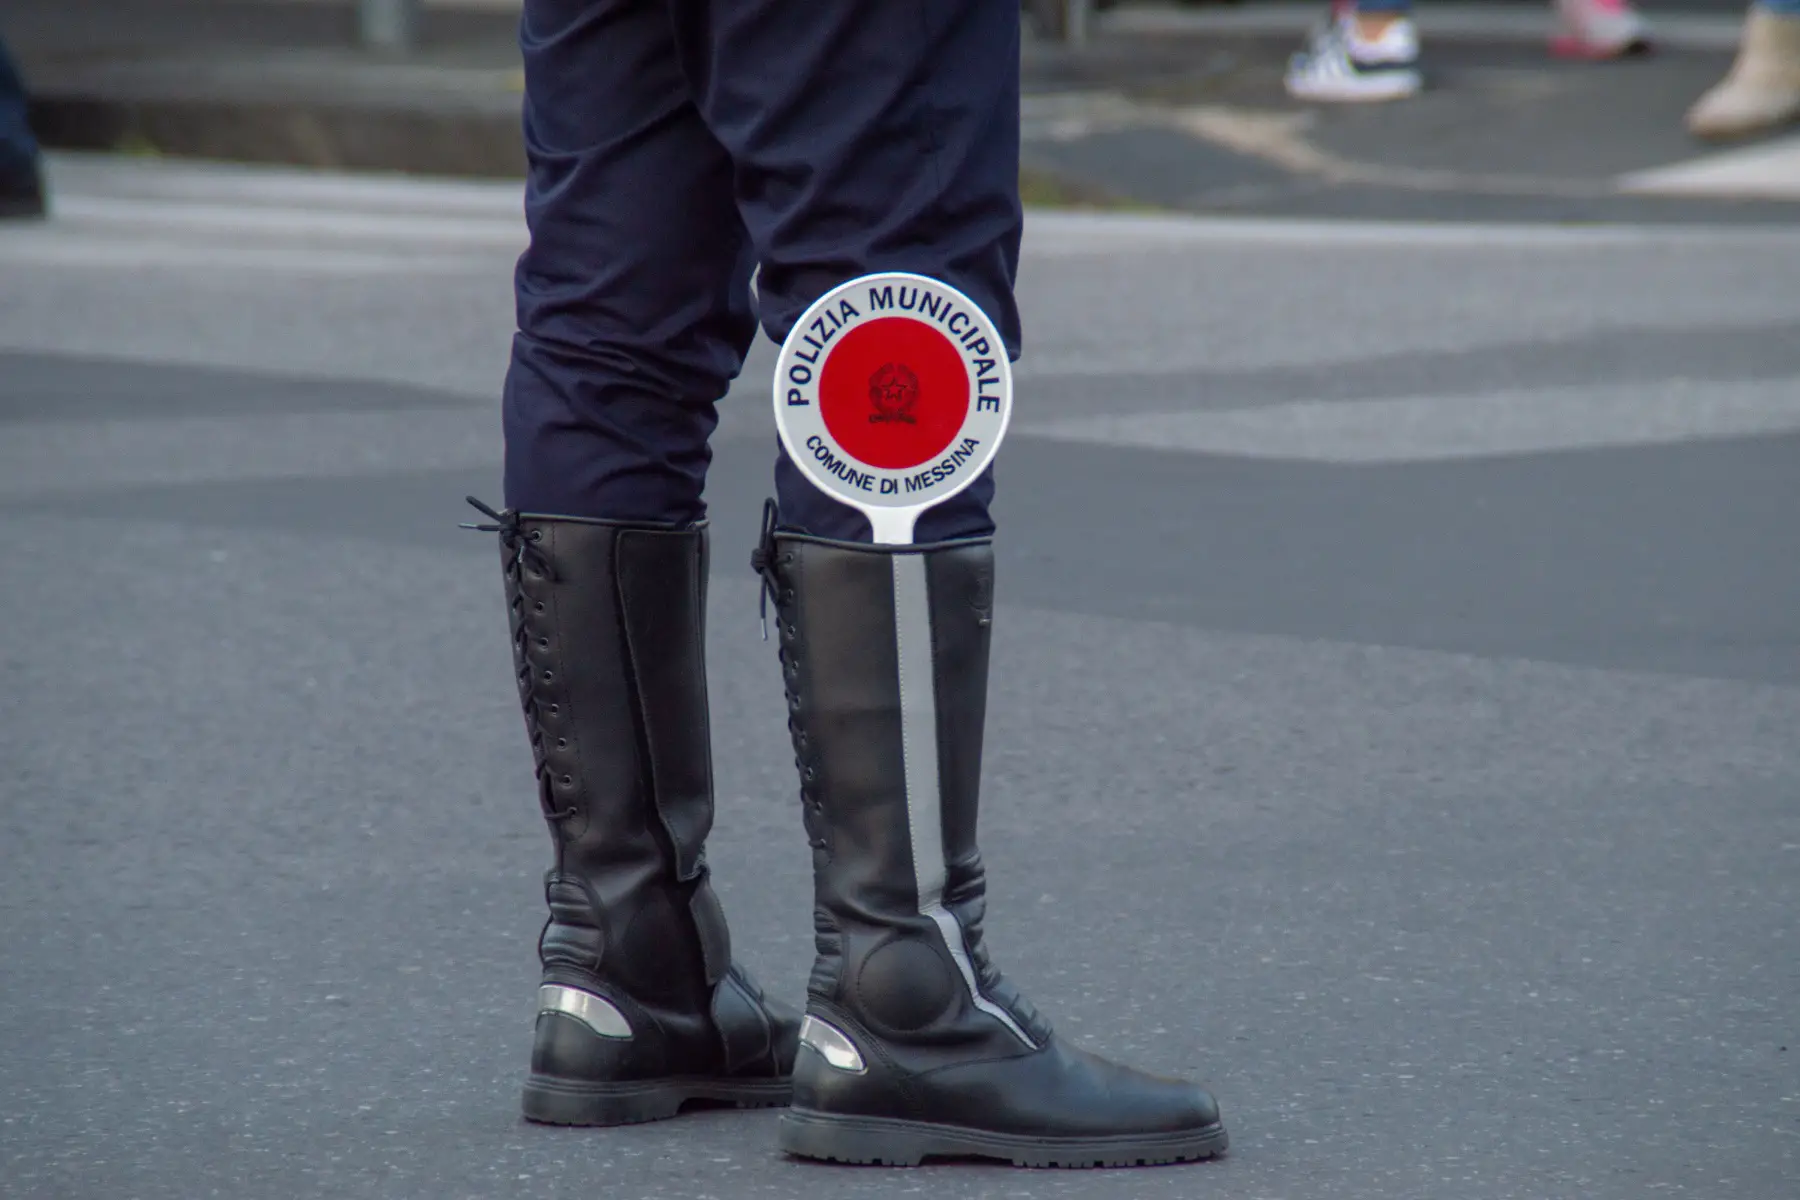 A close up of the leg of a police officer wearing a 